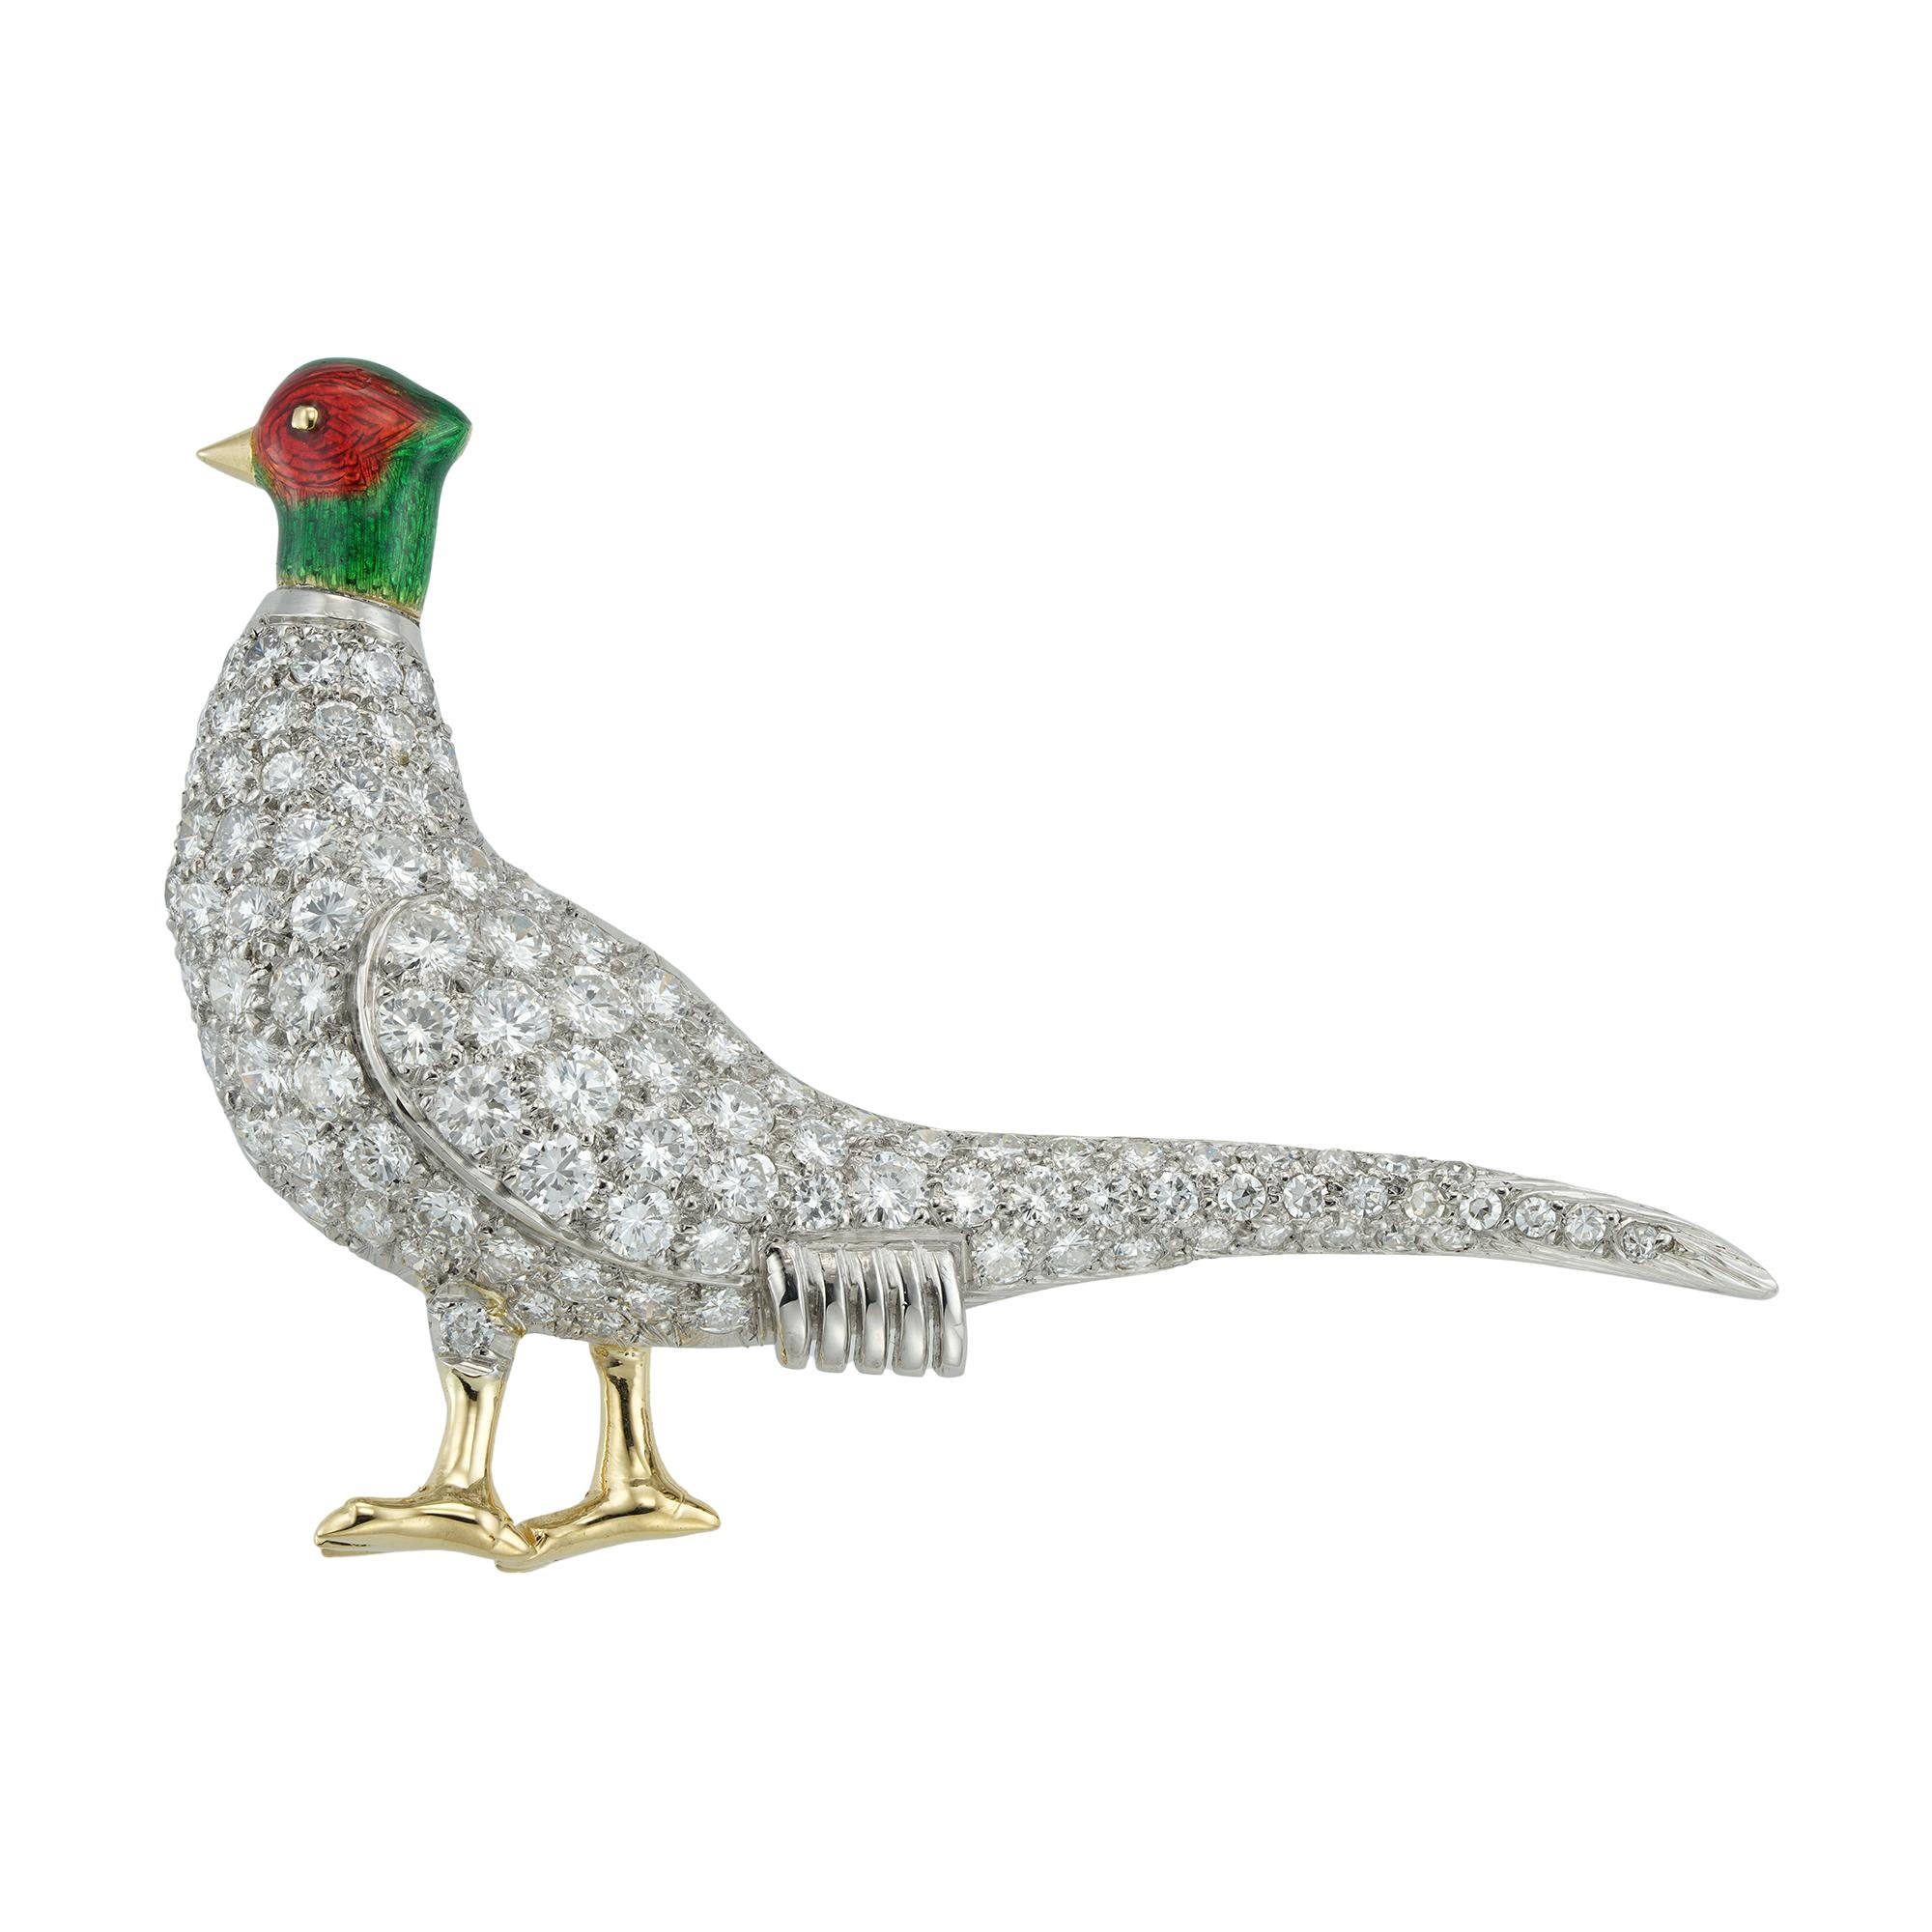 A diamond-set male pheasant brooch, the head with red and green enamel decorations, the body pave-set with round brilliant-cut diamonds estimated to weigh 5 carats in total, with yellow gold legs and feet, mounted in platinum and yellow gold, with